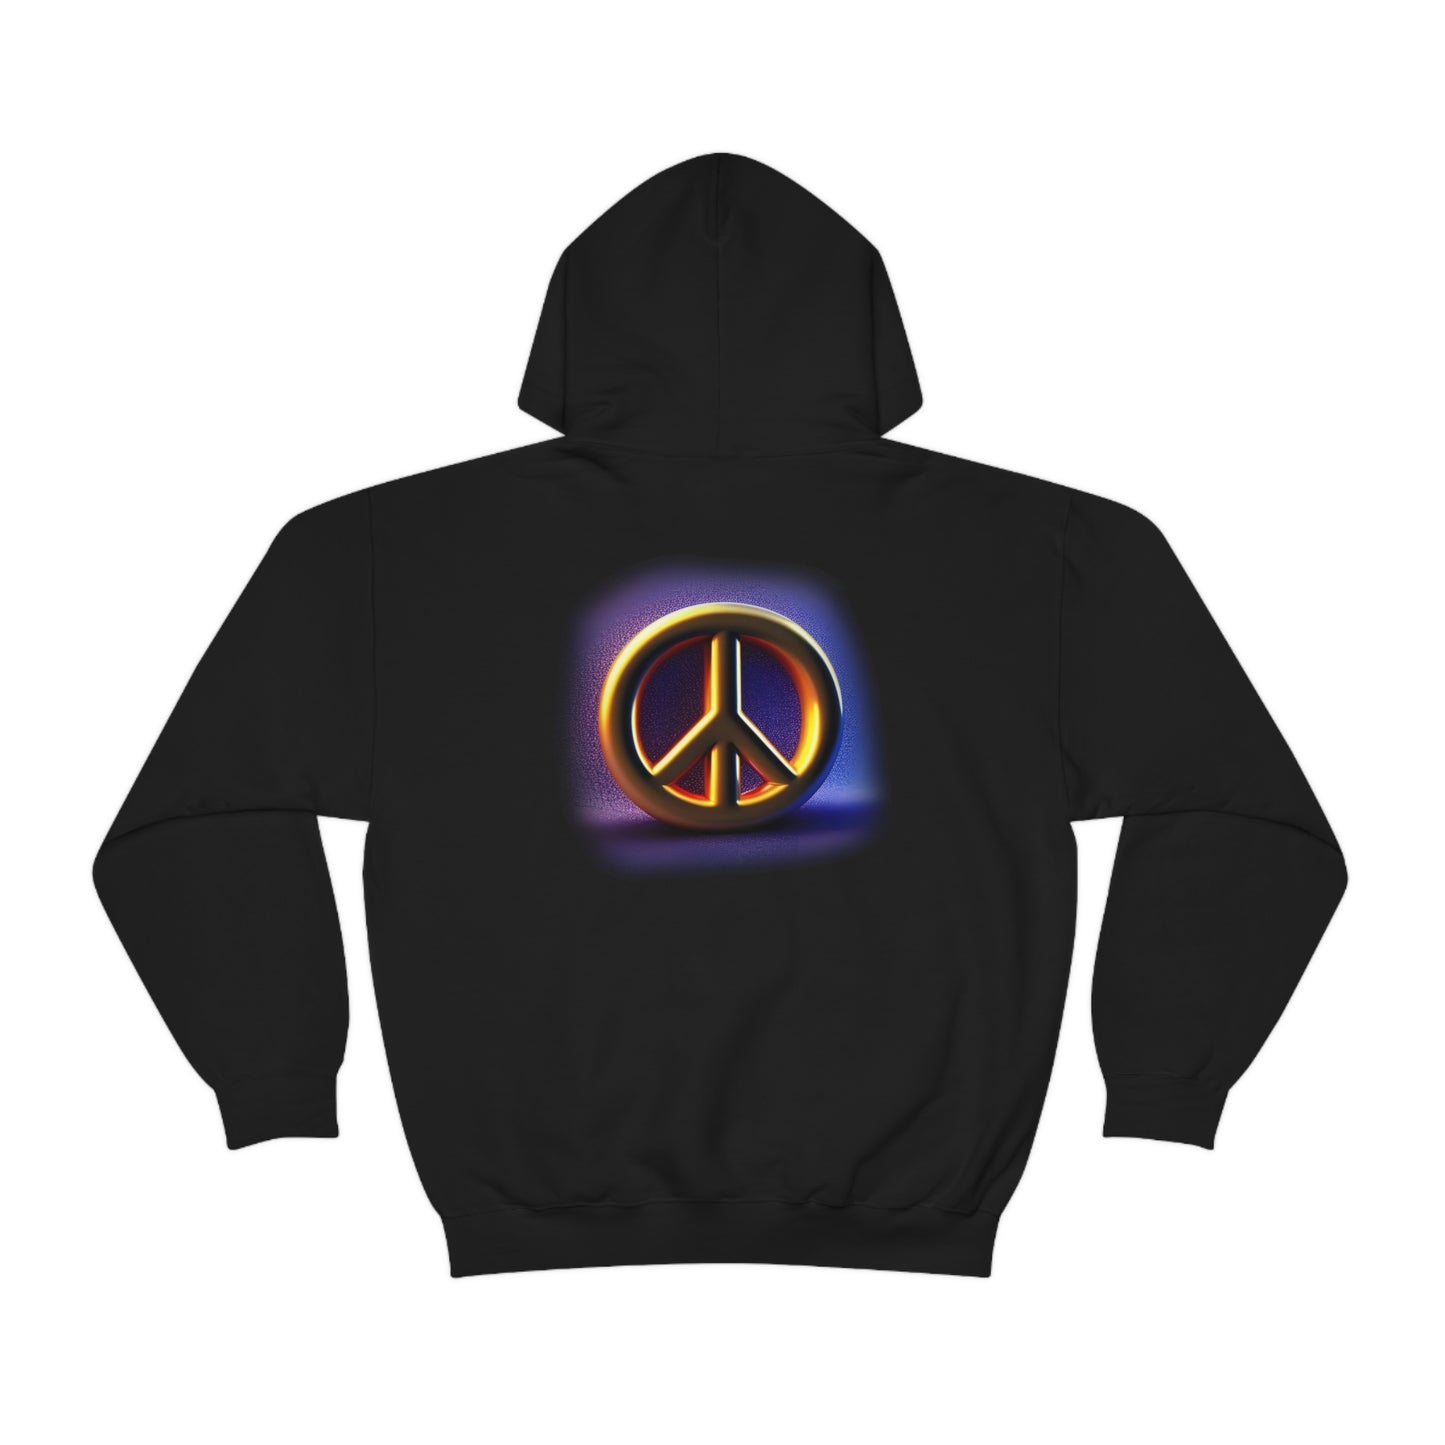 Peaceful Reflections: 3D Peace Sign Hooded Sweatshirt